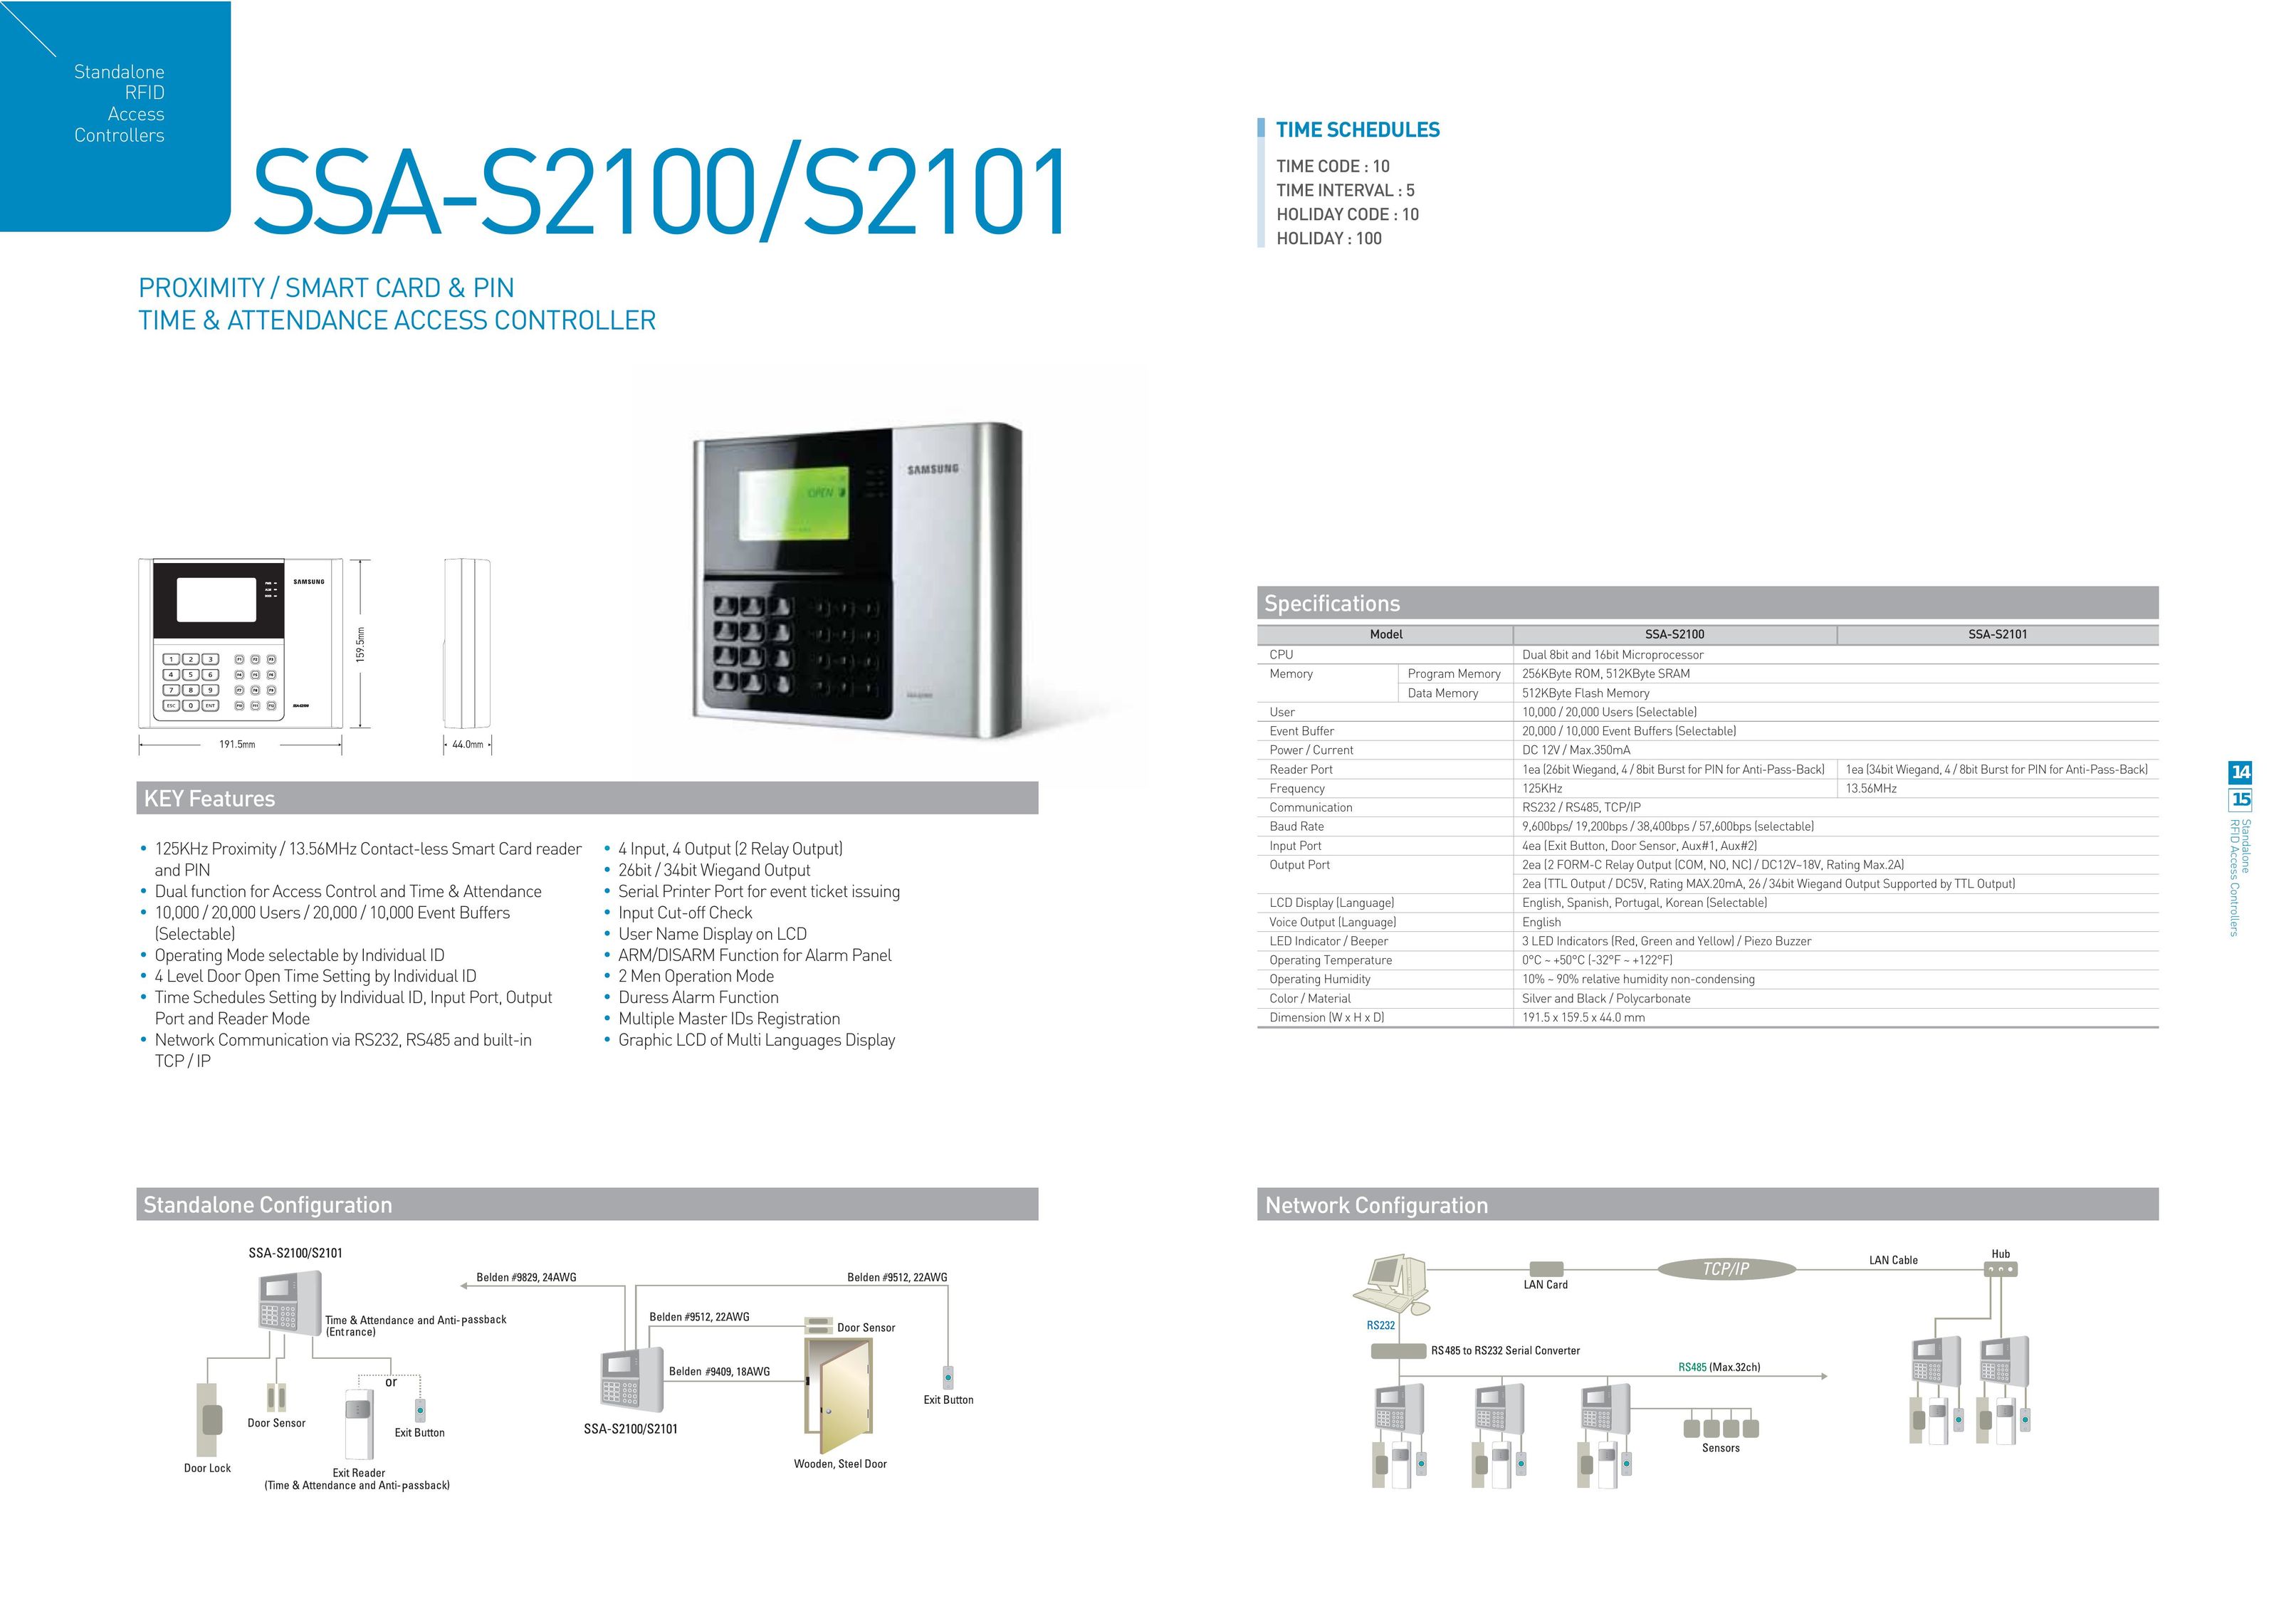 Samsung SSA-S2101 Home Security System User Manual